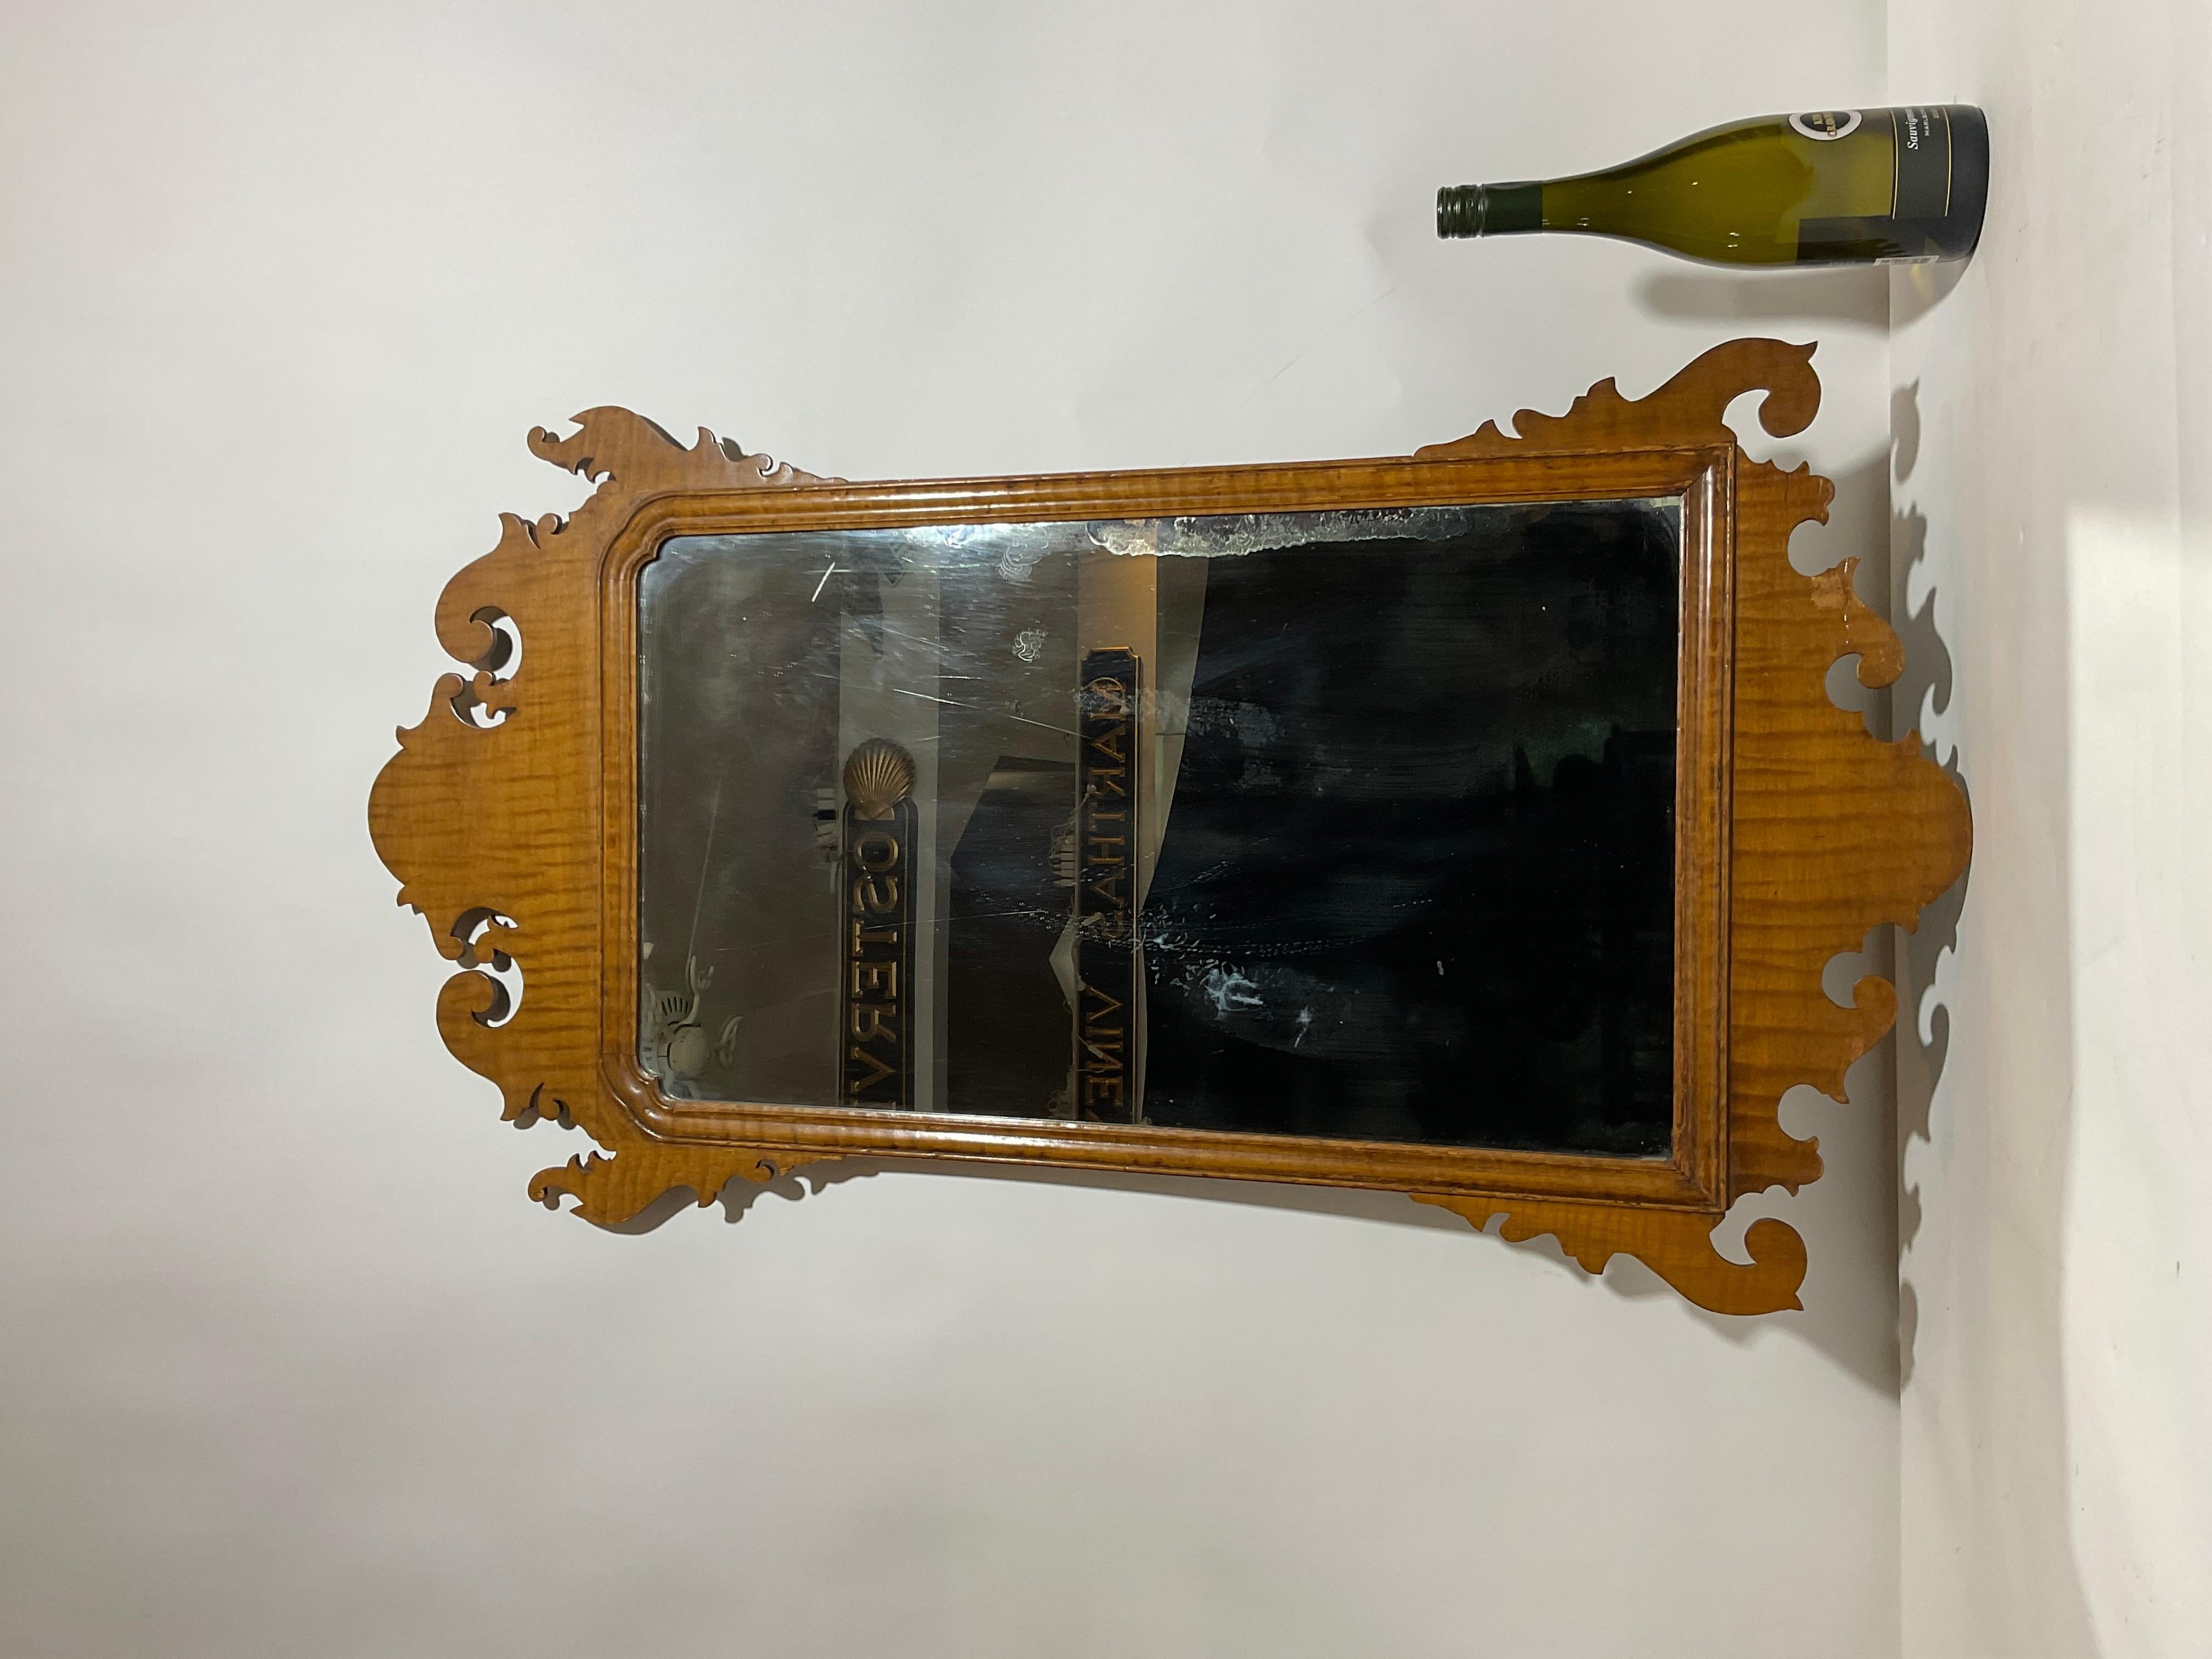 Antique tiger maple mirror. Very decorative but not perfect. Some veneer loss, some staining to mirror.

Weight: 8 lbs
Overall Dimensions: 42